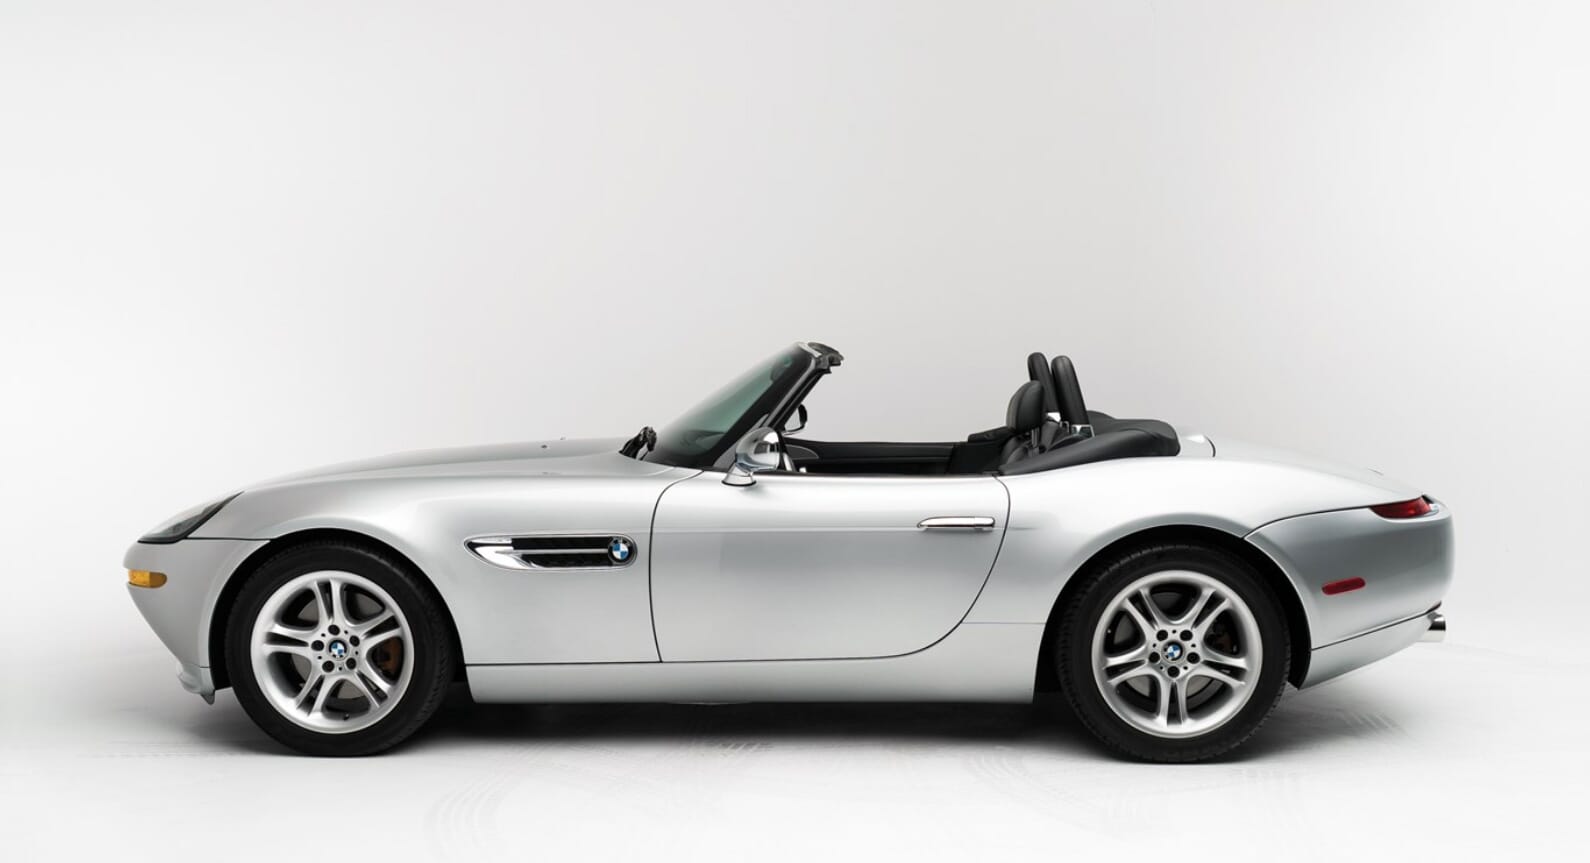 Steve Jobs Once Owned This Classic Minimalist BMW Z8